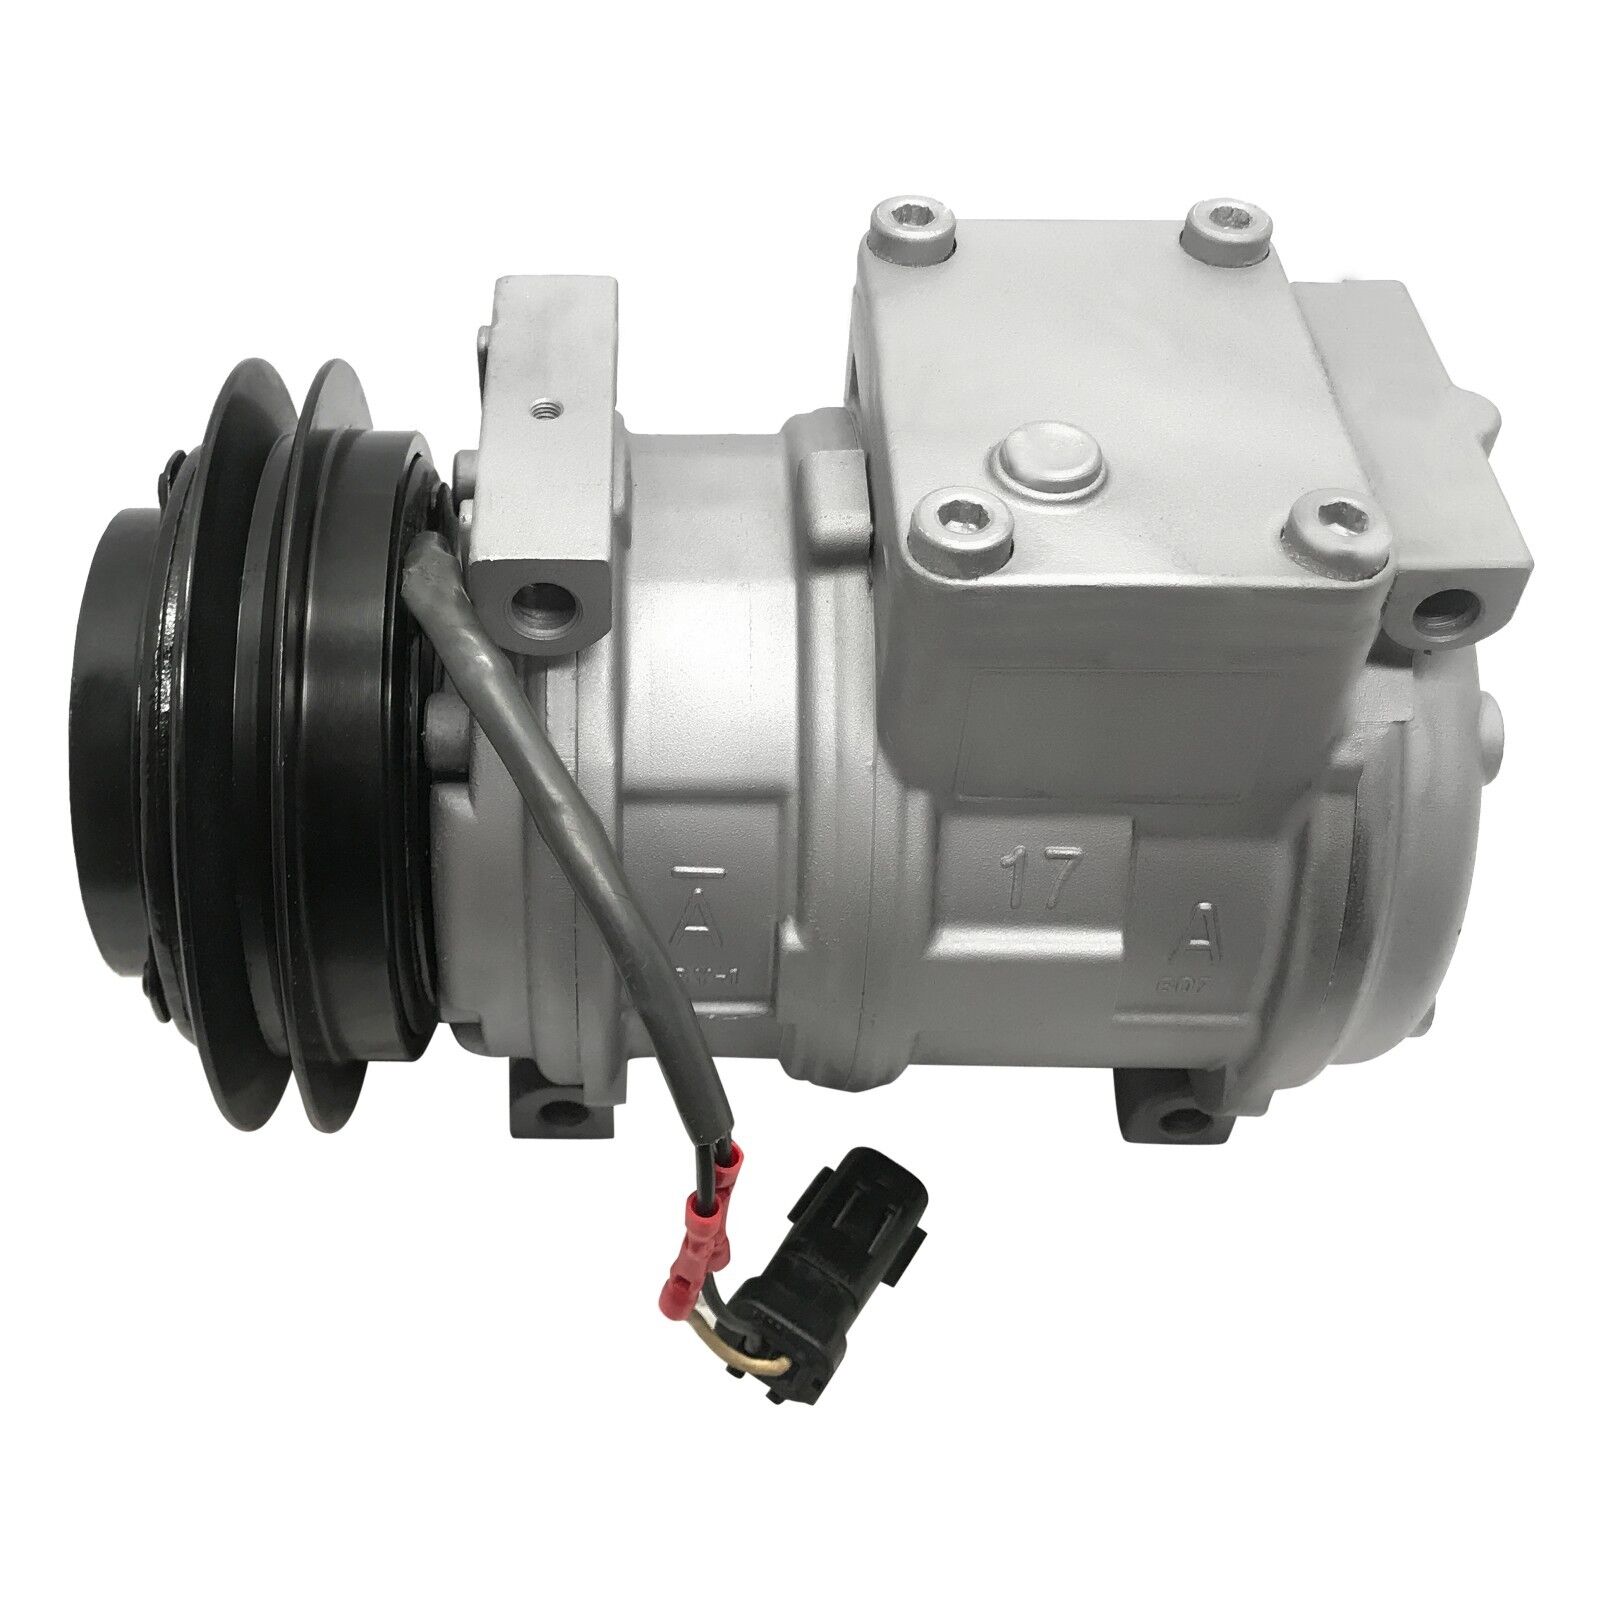 NEW RYC AC Compressor and A/C Clutch GH305 Fits 96-00 Grand Voyager Base 4-Door